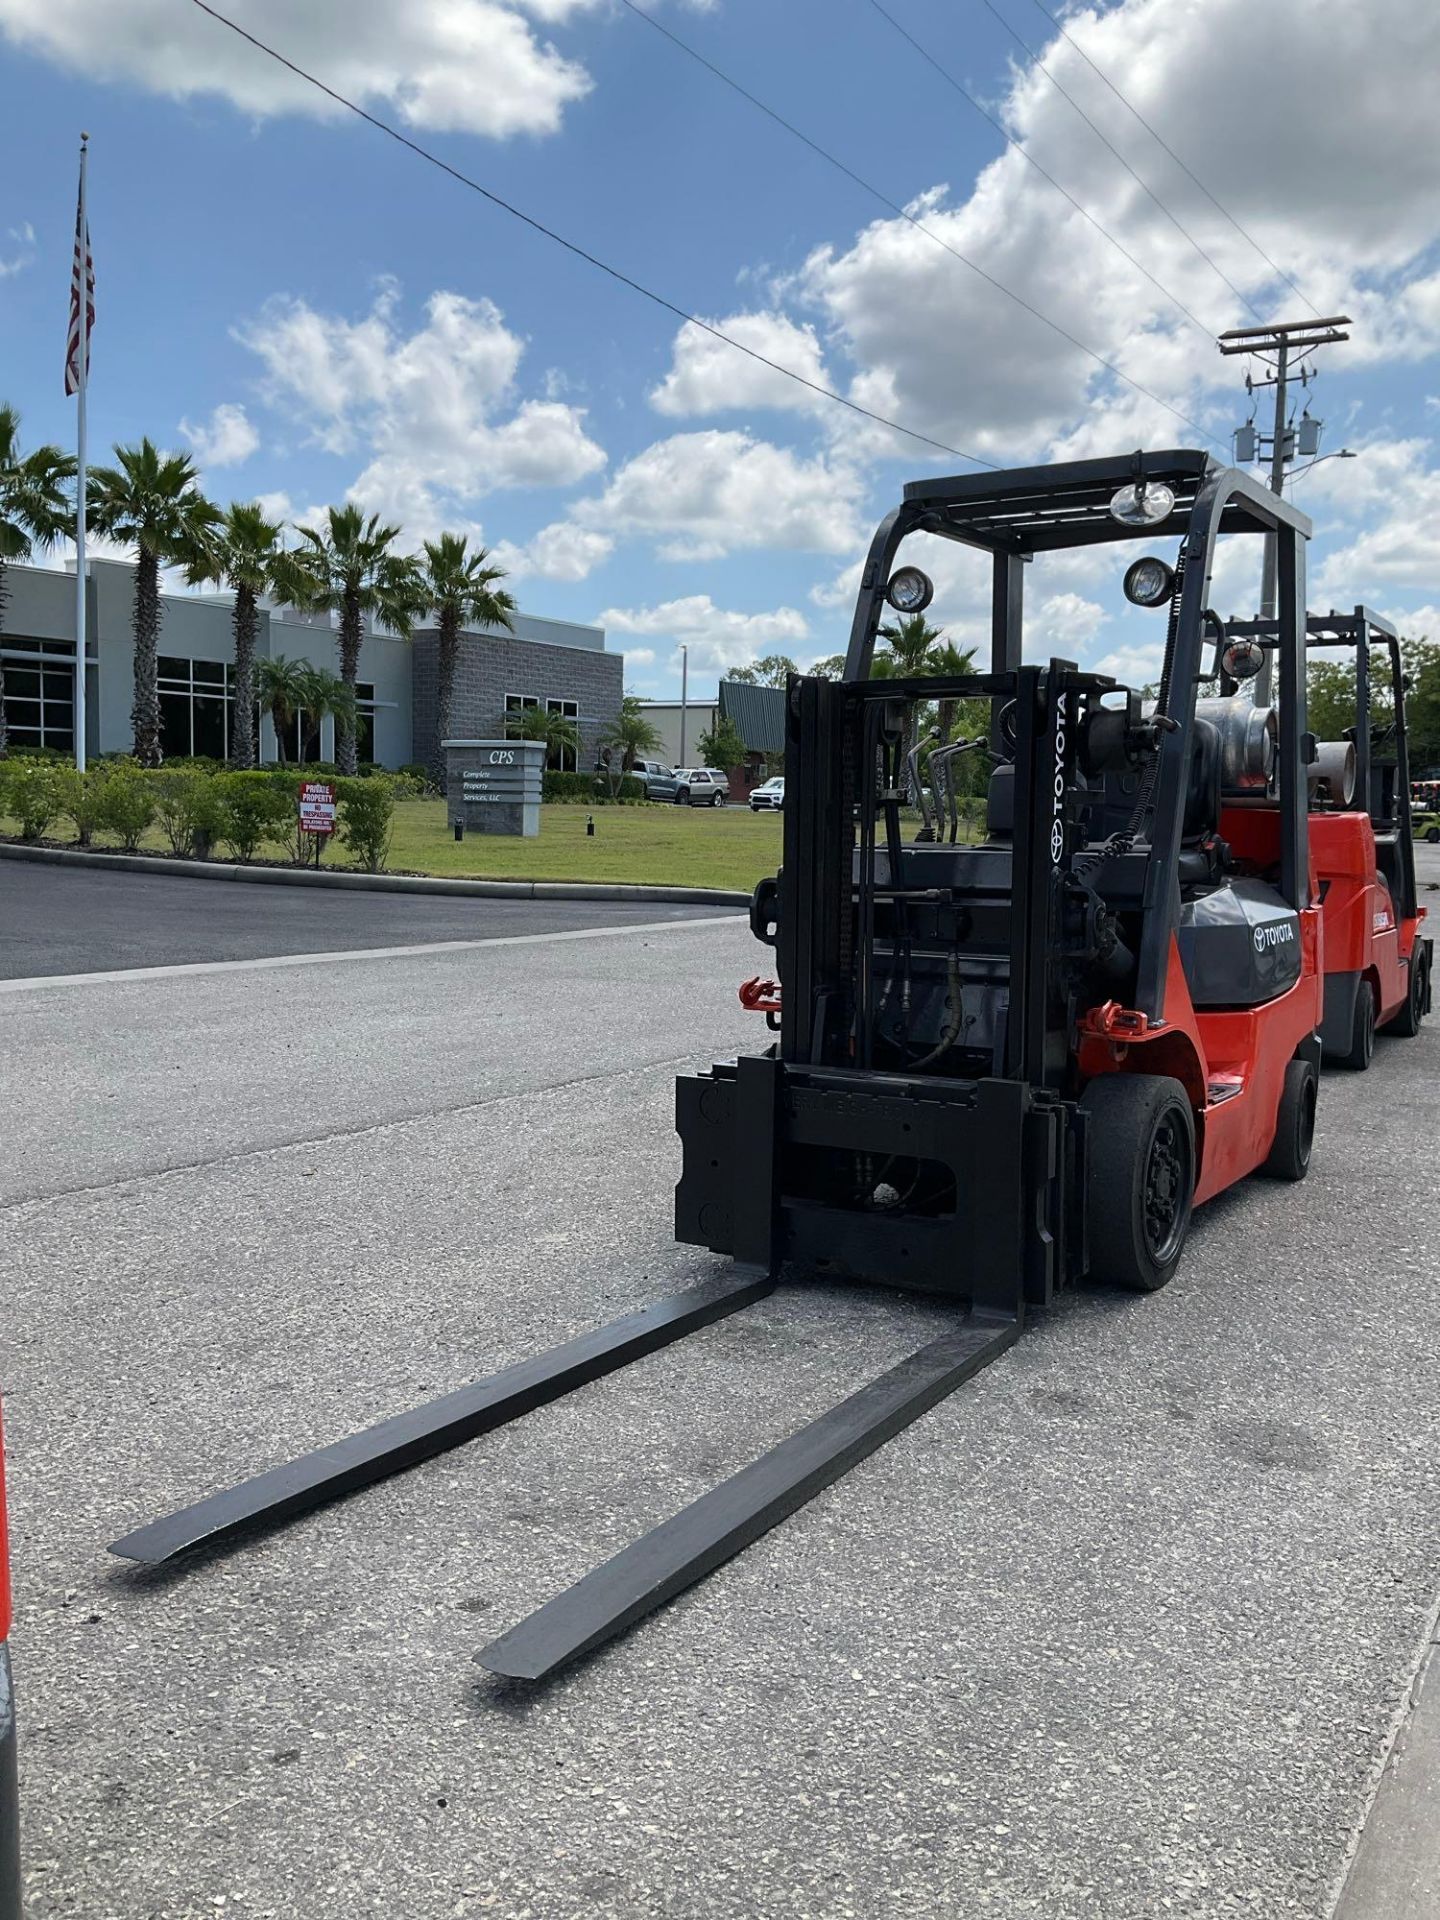 TOYOTA FORKLIFT MODEL 7FGCU25, LP POWERED, APPROX MAX CAPACITY 4700, MAX HEIGHT 80in, TILT, SIDE - Image 9 of 14